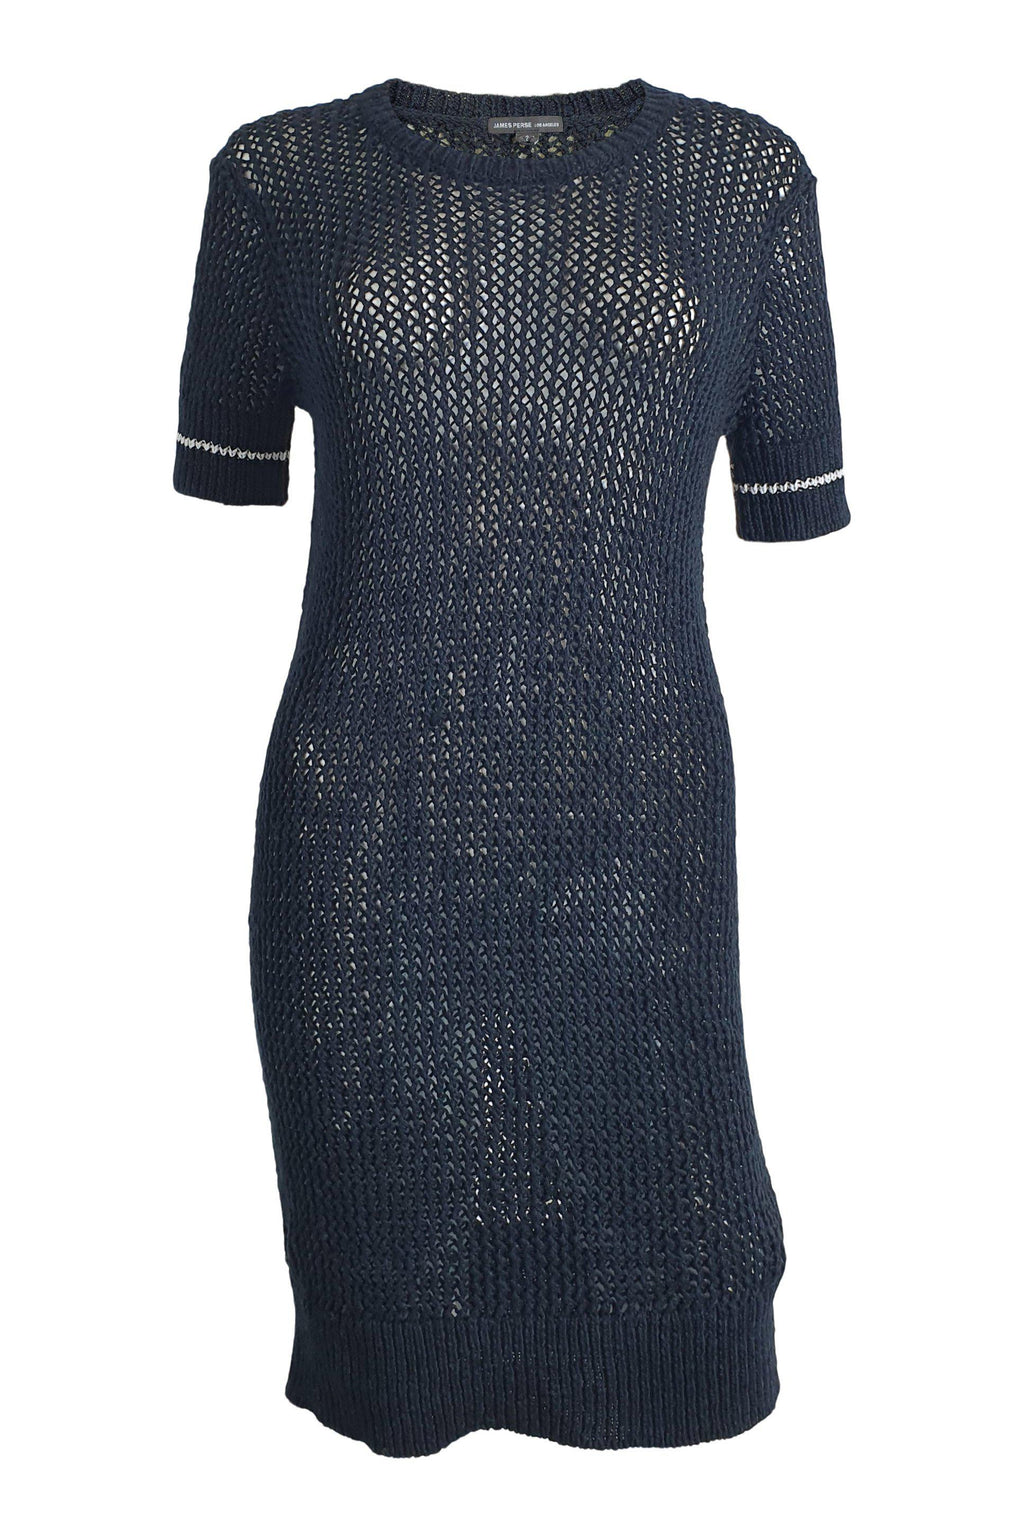 JAMES PERSE Black Knitted Short Sleeved Jumper Dress (US 2)-James Perse-The Freperie